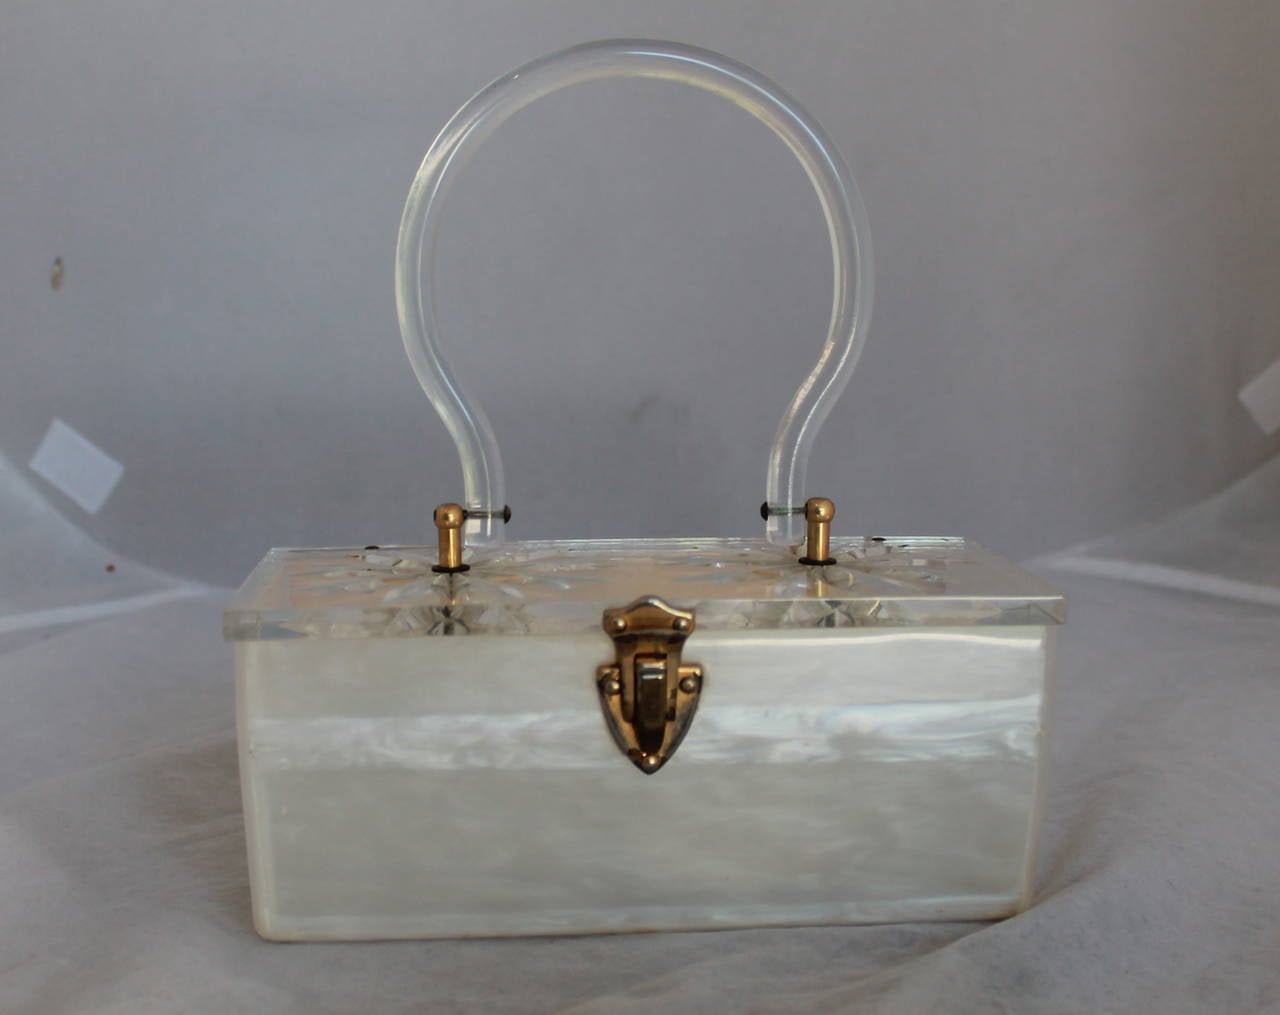 1950s Vintage Reverse Carved Lucite Frosted Top Handle Handbag. This bag is in fair vintage condition with wear consistent with being 65 years old. The top of the bag has a carved design on both sides with a Lucite top handle. The hardware shows